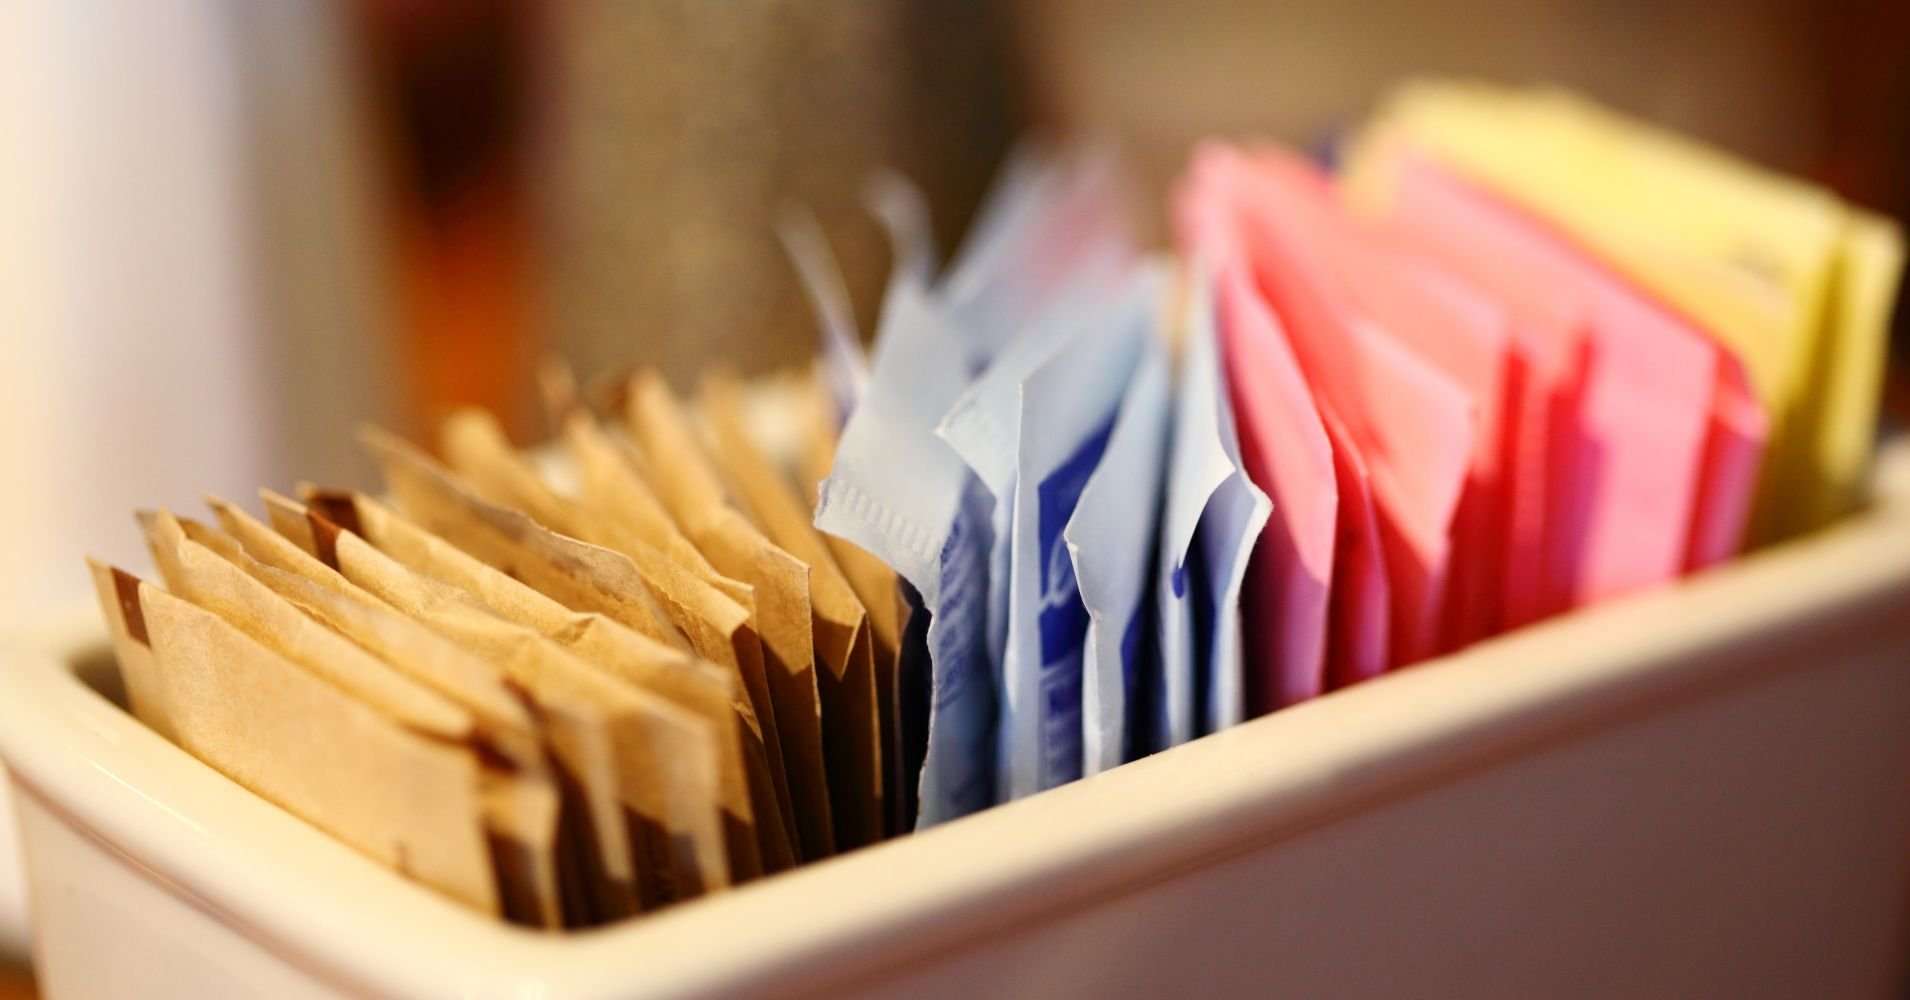 image for Artificial sweeteners are toxic to digestive gut bacteria: study